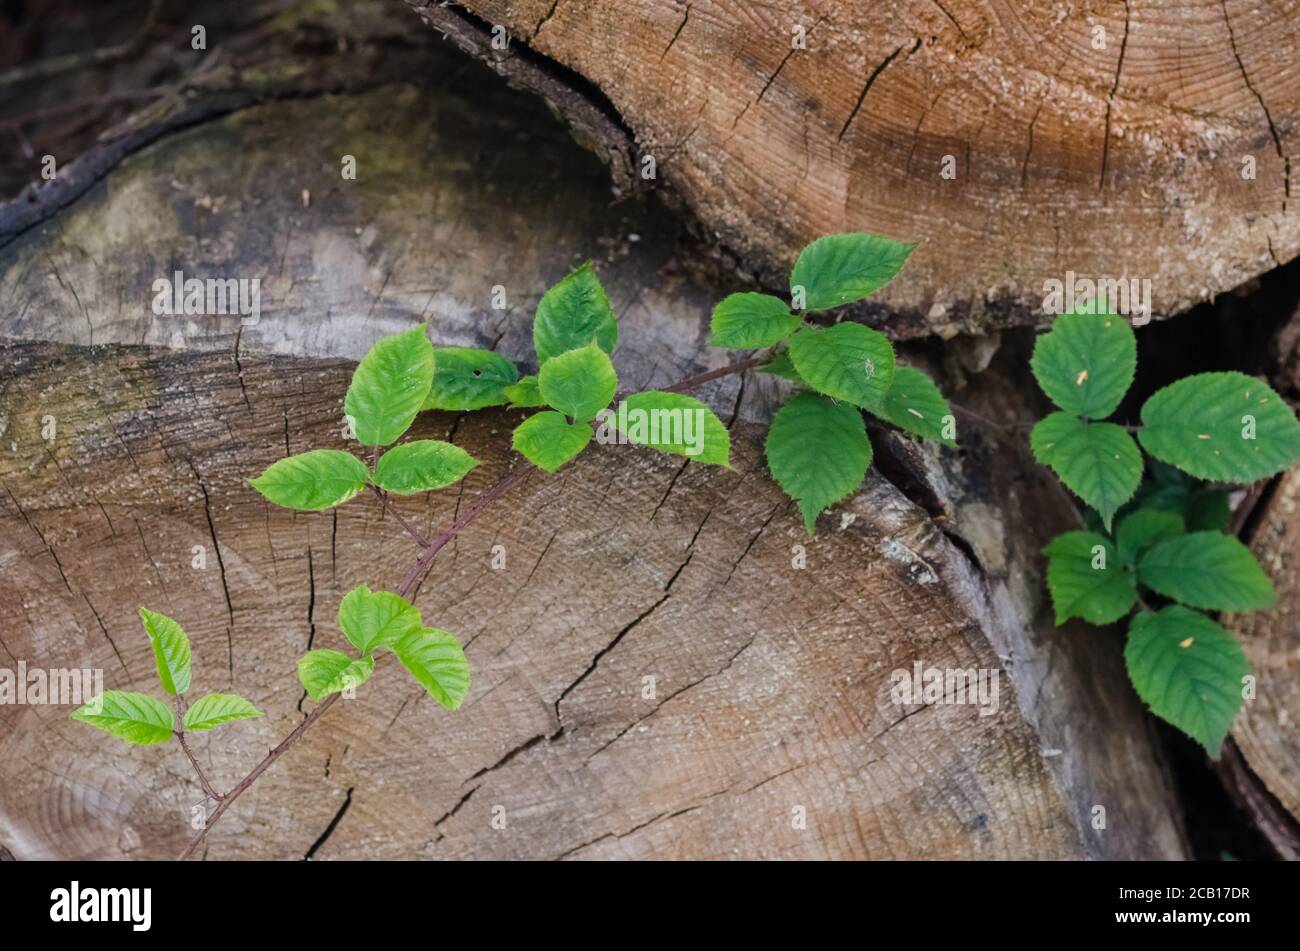 Close-up view of cross-section of a tree trunk with rubus, blackberry leaves in a forest, wooden structure and patterns of felled trees Stock Photo